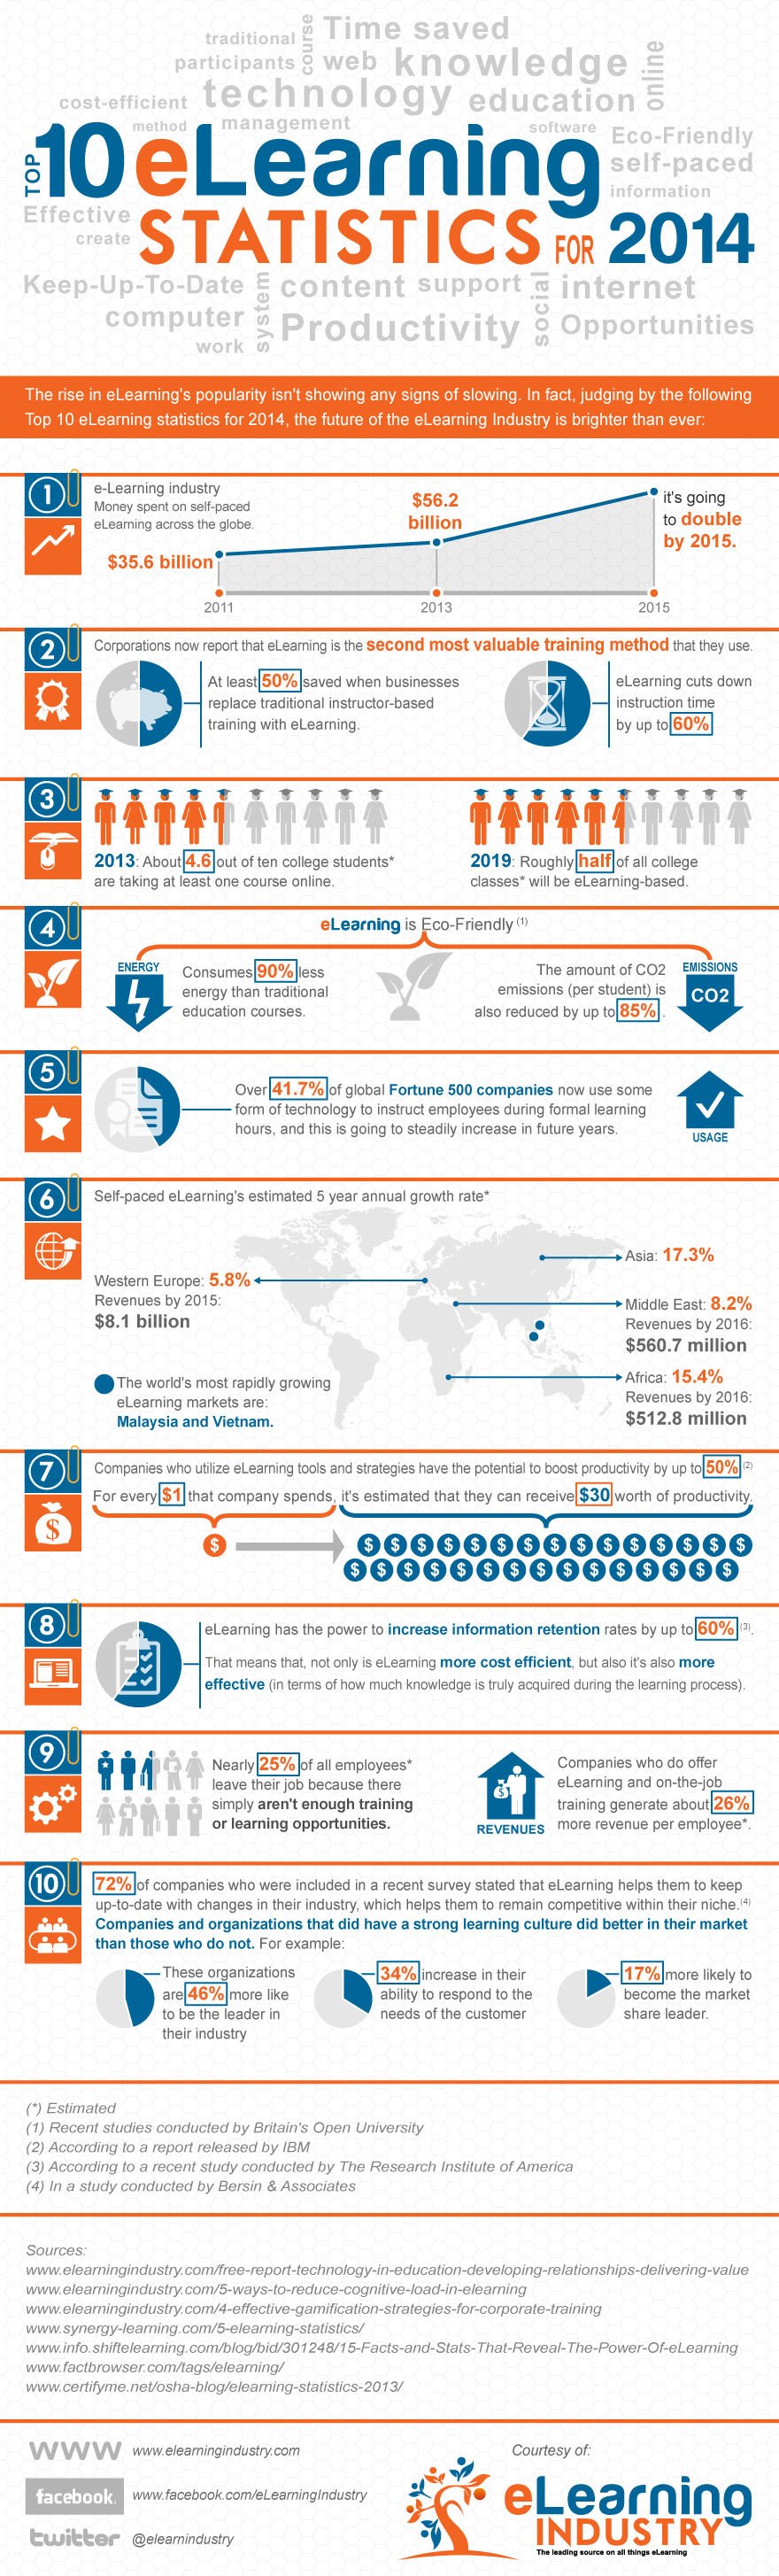 Top-10-eLearning-Statistics-for-2014-Infographic.jpg